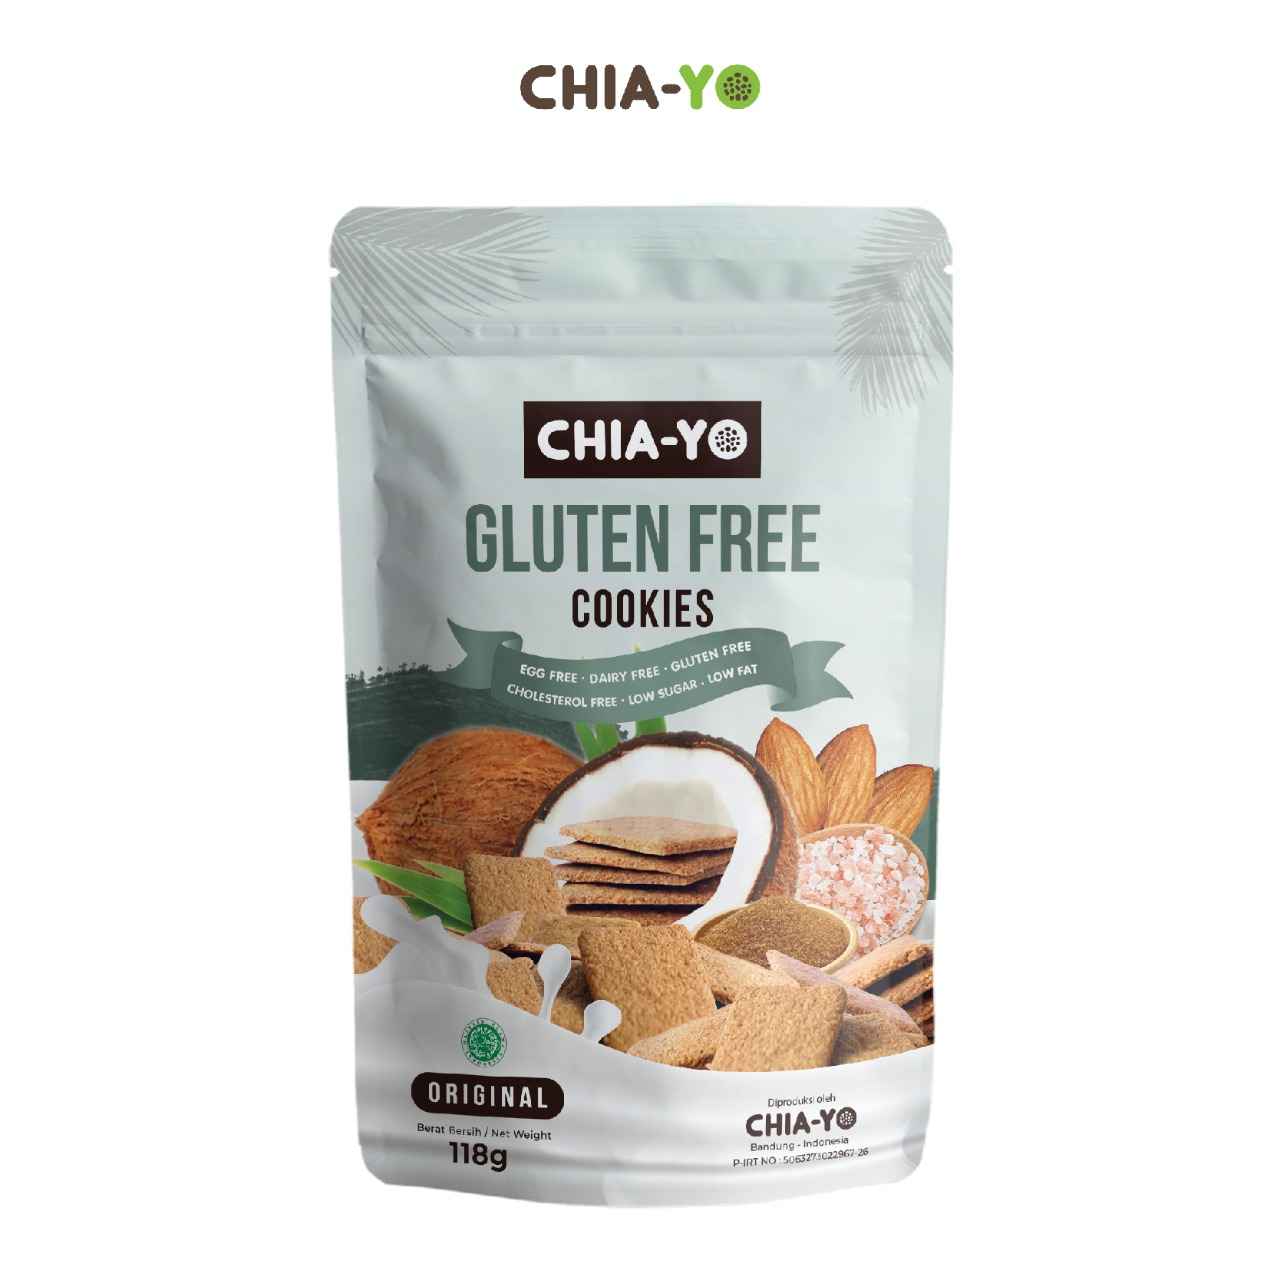 CHIAYO HEALTHY COOKIES GLUTEN FREE 